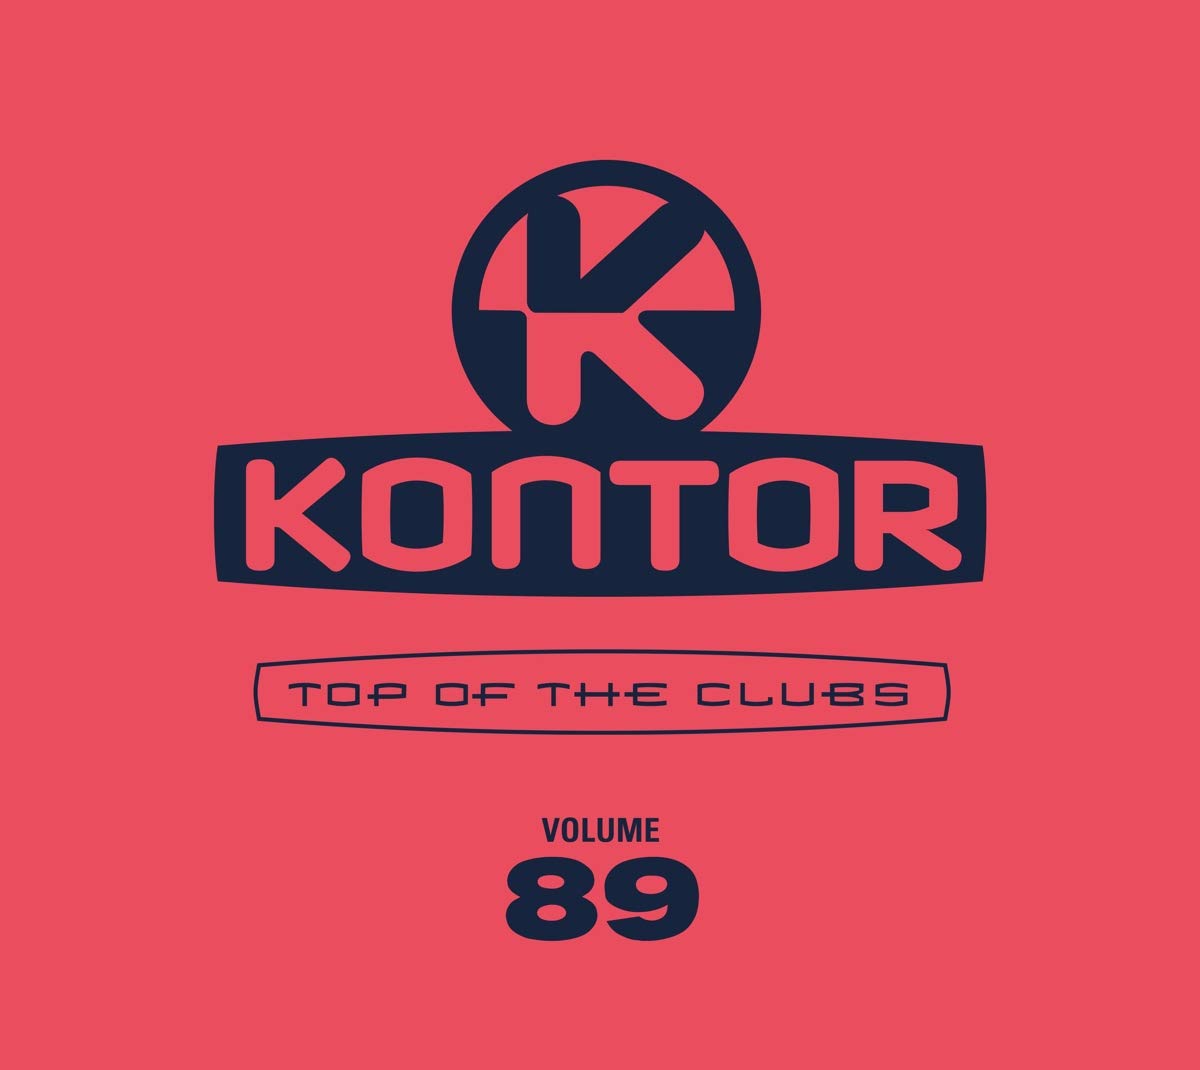 VARIOUS ARTISTS - KONTOR TOP OF THE CLUBS VOL. 89